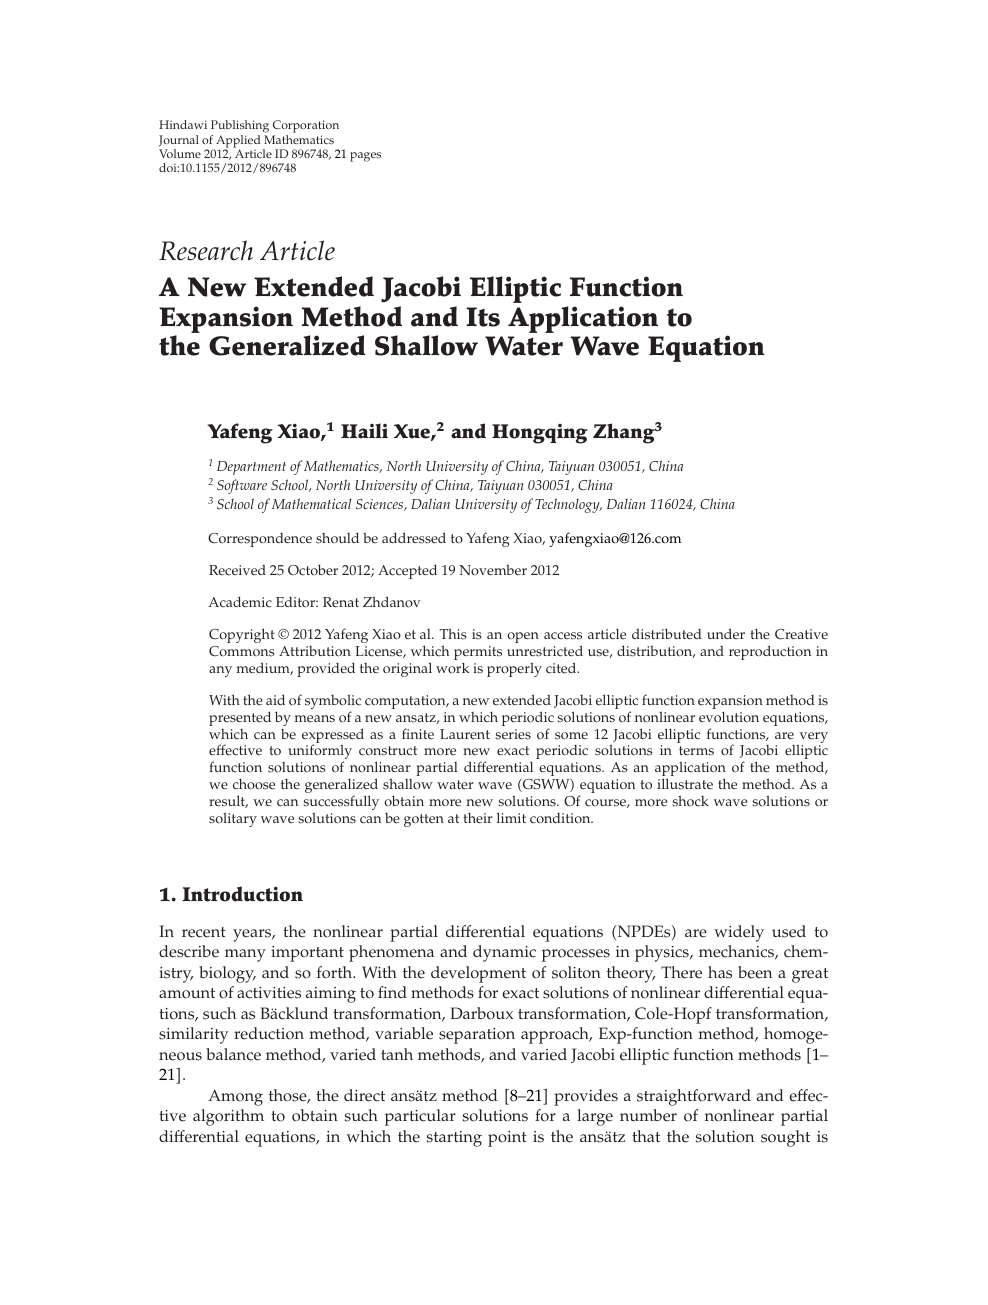 A New Extended Jacobi Elliptic Function Expansion Method And Its Application To The Generalized Shallow Water Wave Equation Topic Of Research Paper In Mathematics Download Scholarly Article Pdf And Read For